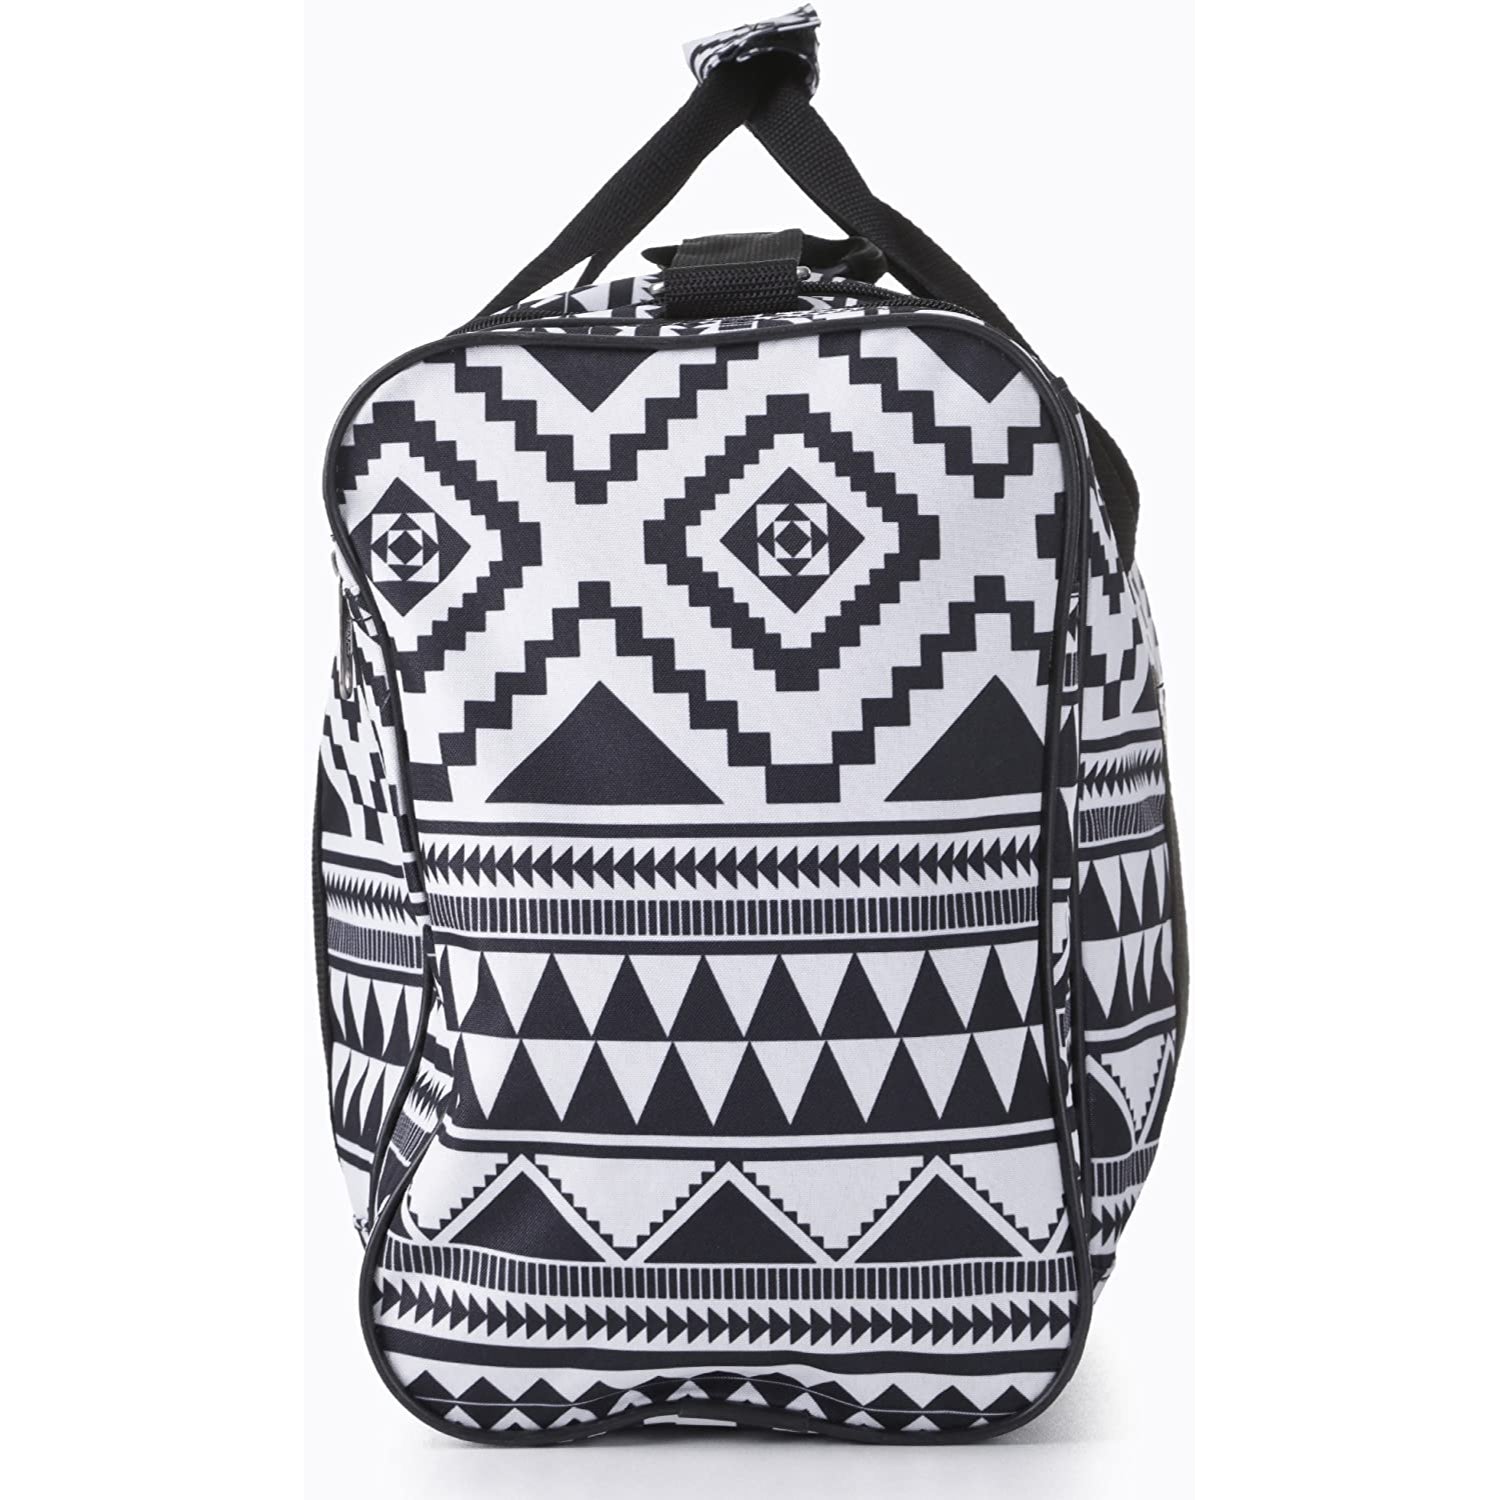 5 Cities Under Seat Flight/Gym/Sports Bag, Aztec Black and White